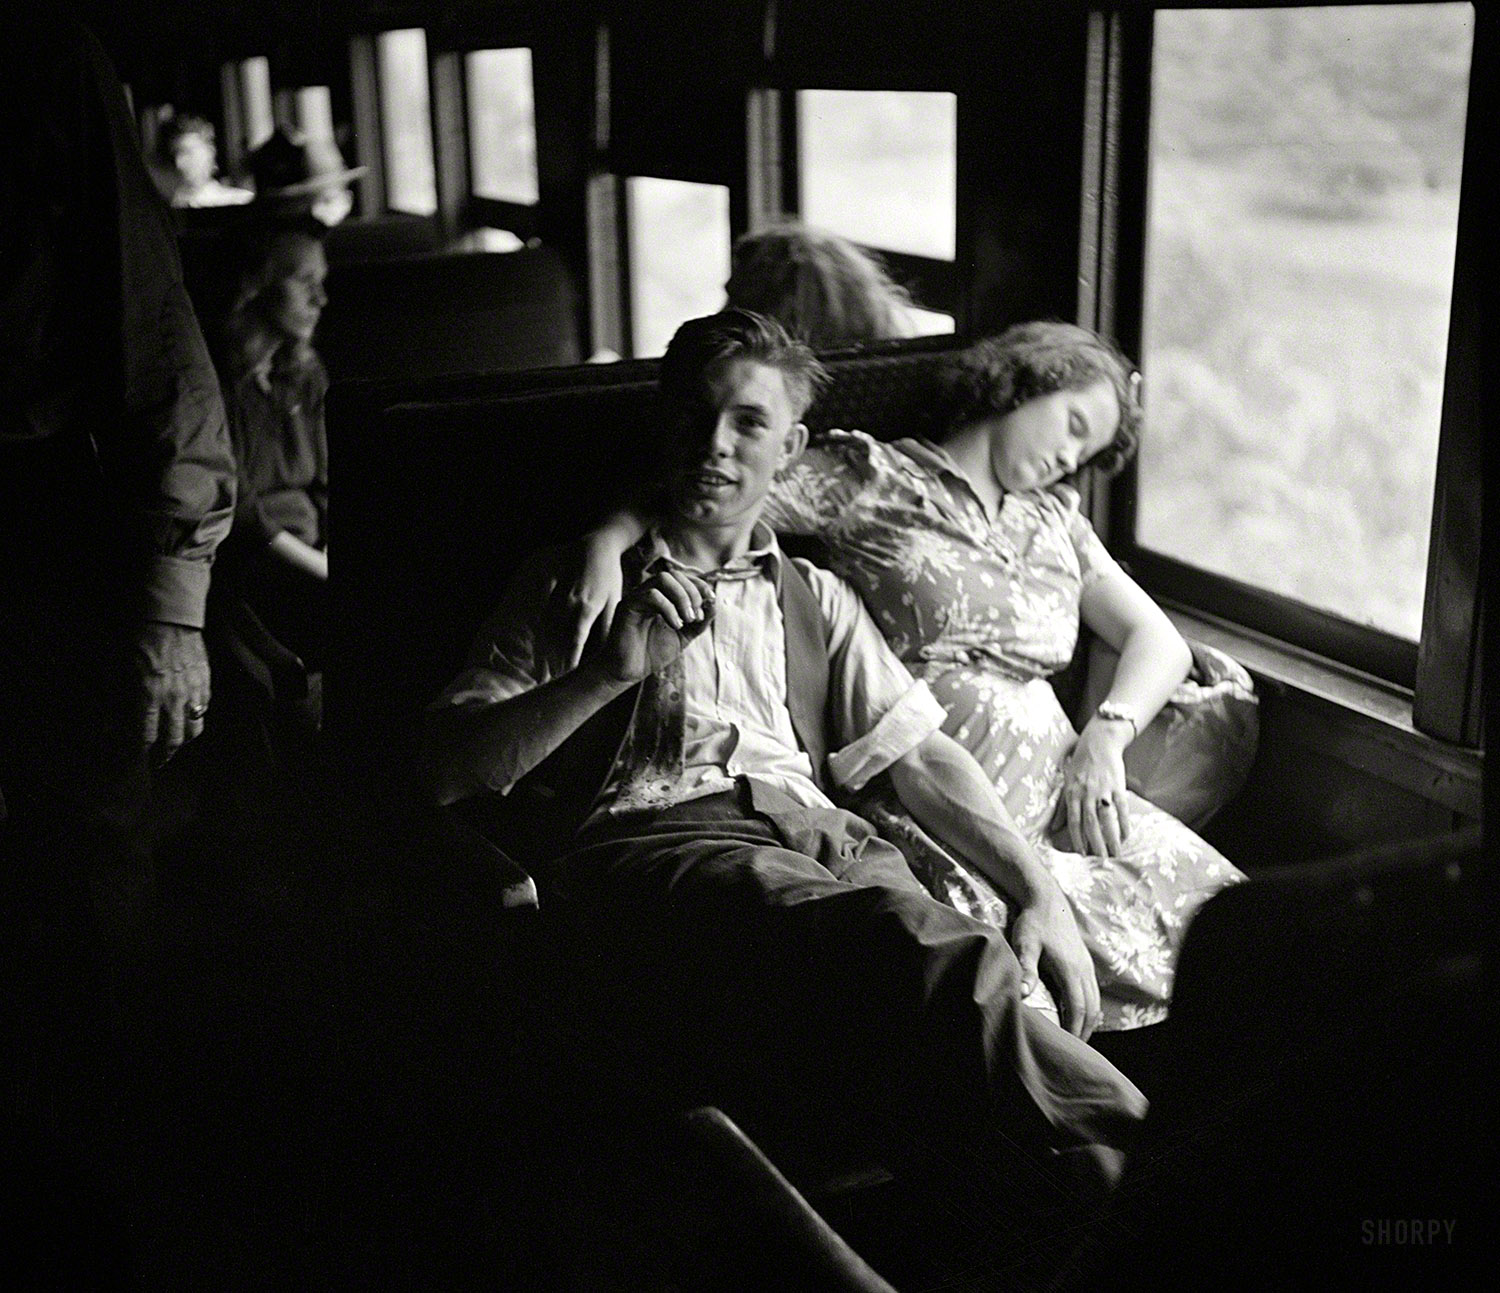 &nbsp; &nbsp; &nbsp; Two of some 300 West Virginians recruited by the Farm Security Administration to travel to Upstate New York for the fall harvest of peaches, apples, tomatoes and other crops, part of a "Food for Victory" campaign occasioned by the wartime manpower shortage.
September 1942. "High school boys and girls going by special train from Richwood, West Virginia, to upper New York state to help bring in the harvest." Photo by John Collier for the Farm Security Administration. View full size.